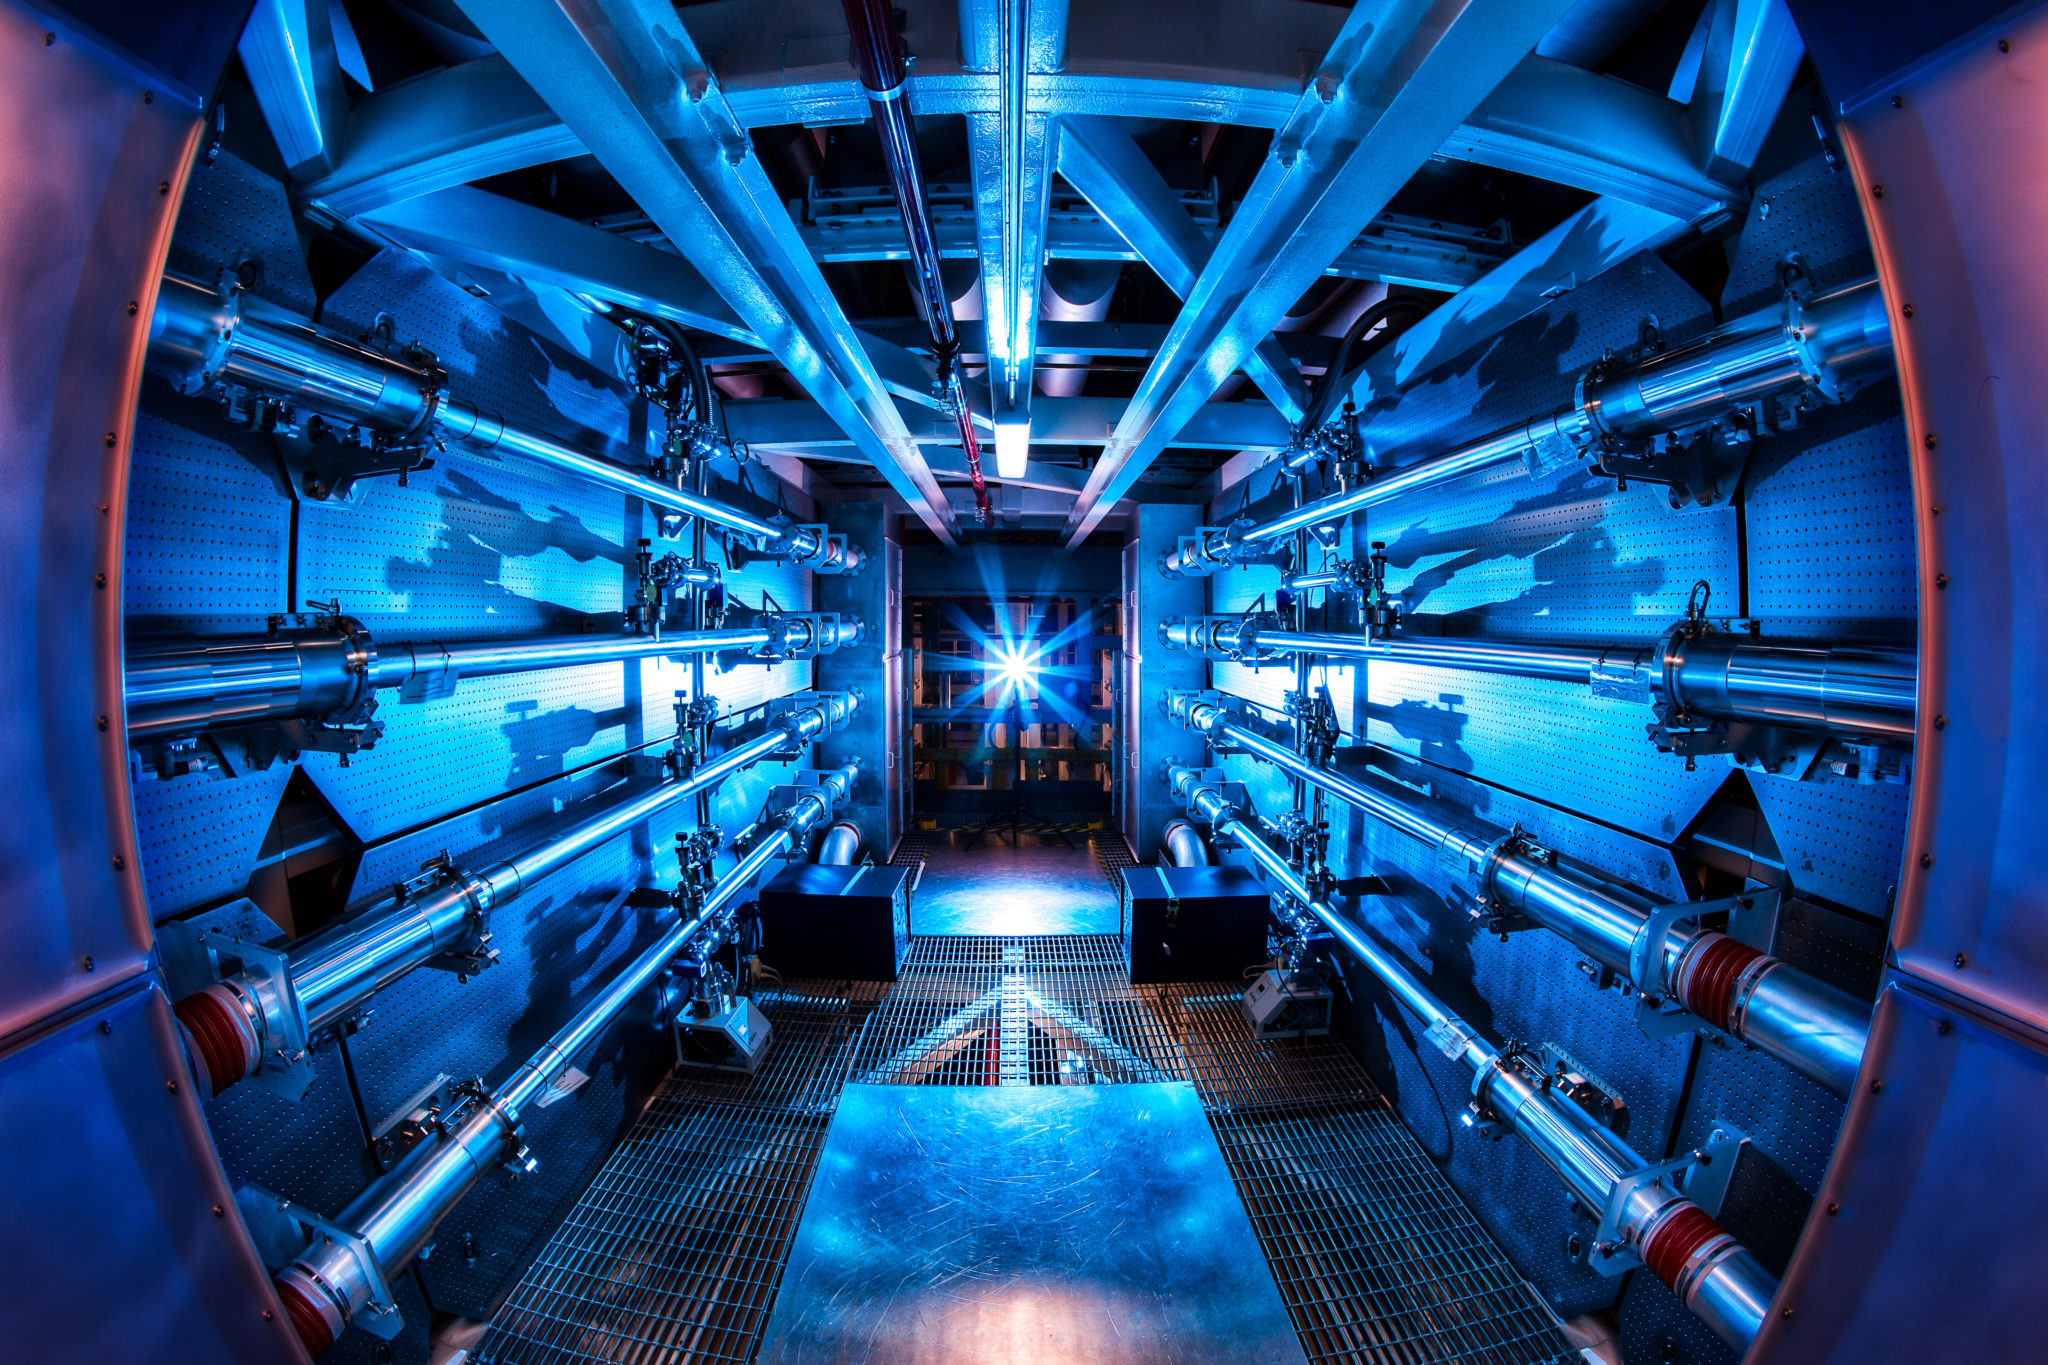 Interior view of the National Ignition Facility's target chamber at Lawrence Livermore National Laboratory